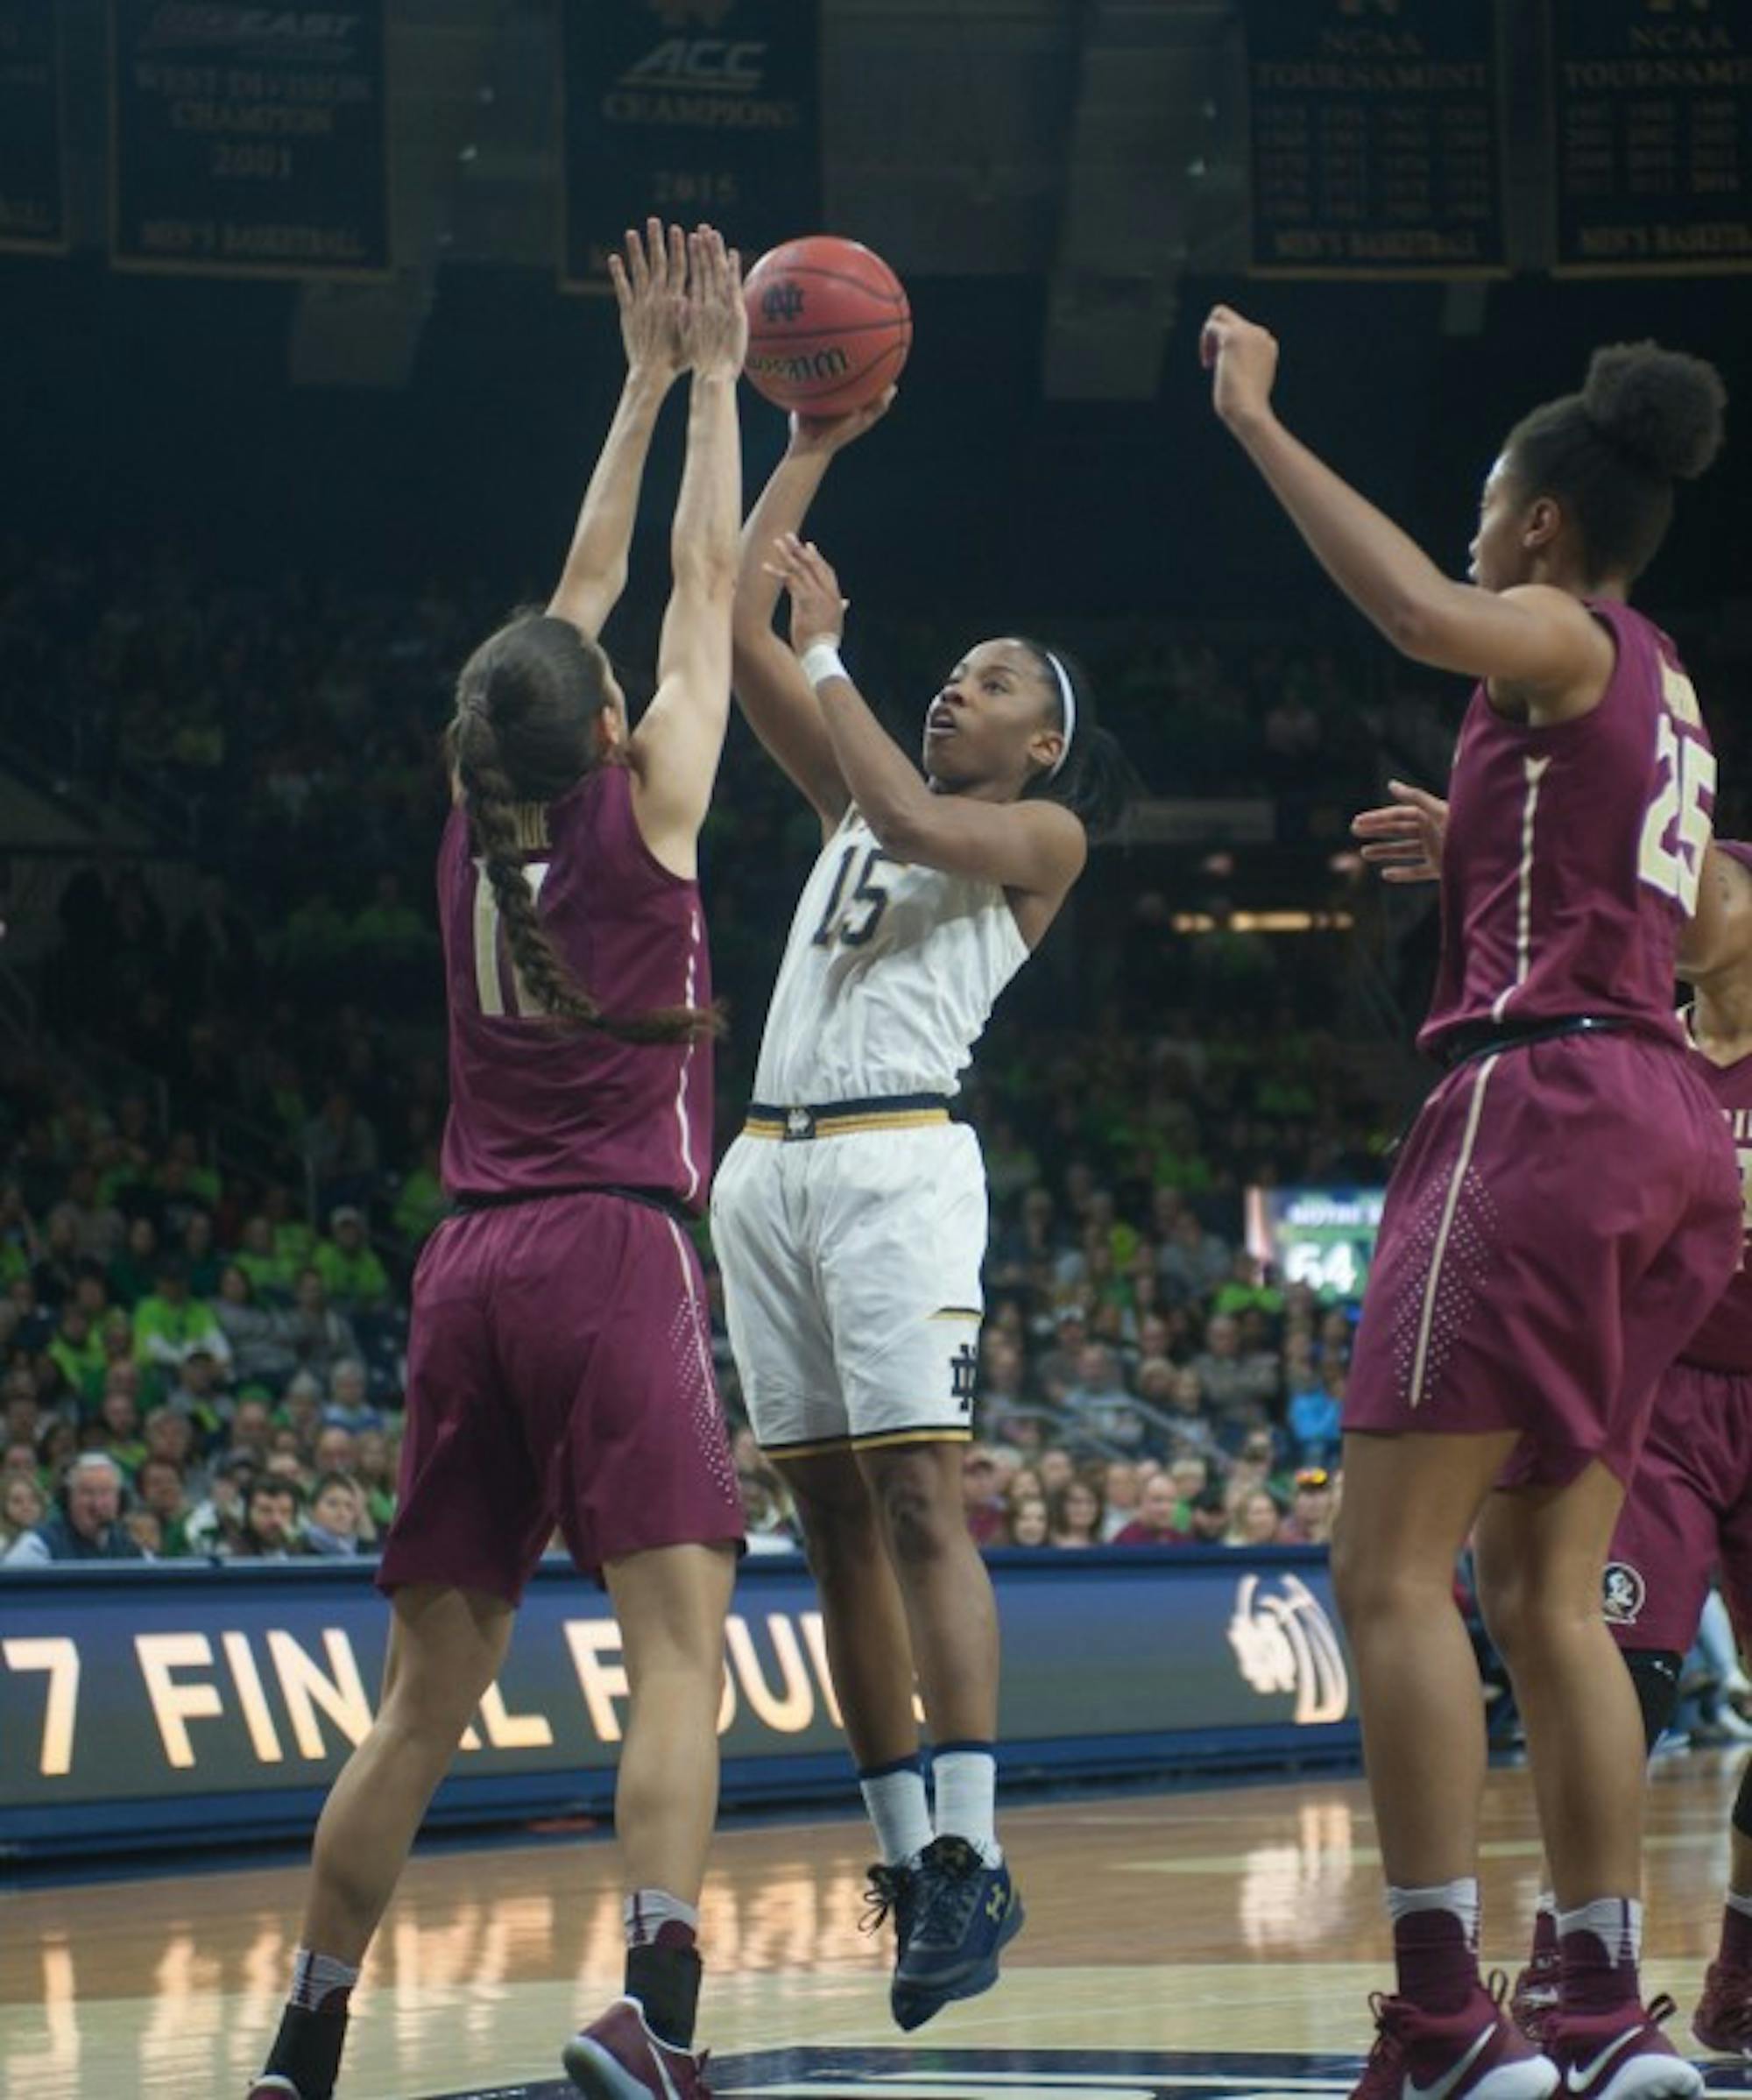 Irish senior guard Lindsay Allen pulls up for a floater during Notre Dame's 79-61 victory over Florida State on Feb. 26 at Purcell Pavilion. Allen holds the ACC record for most assists in a season.